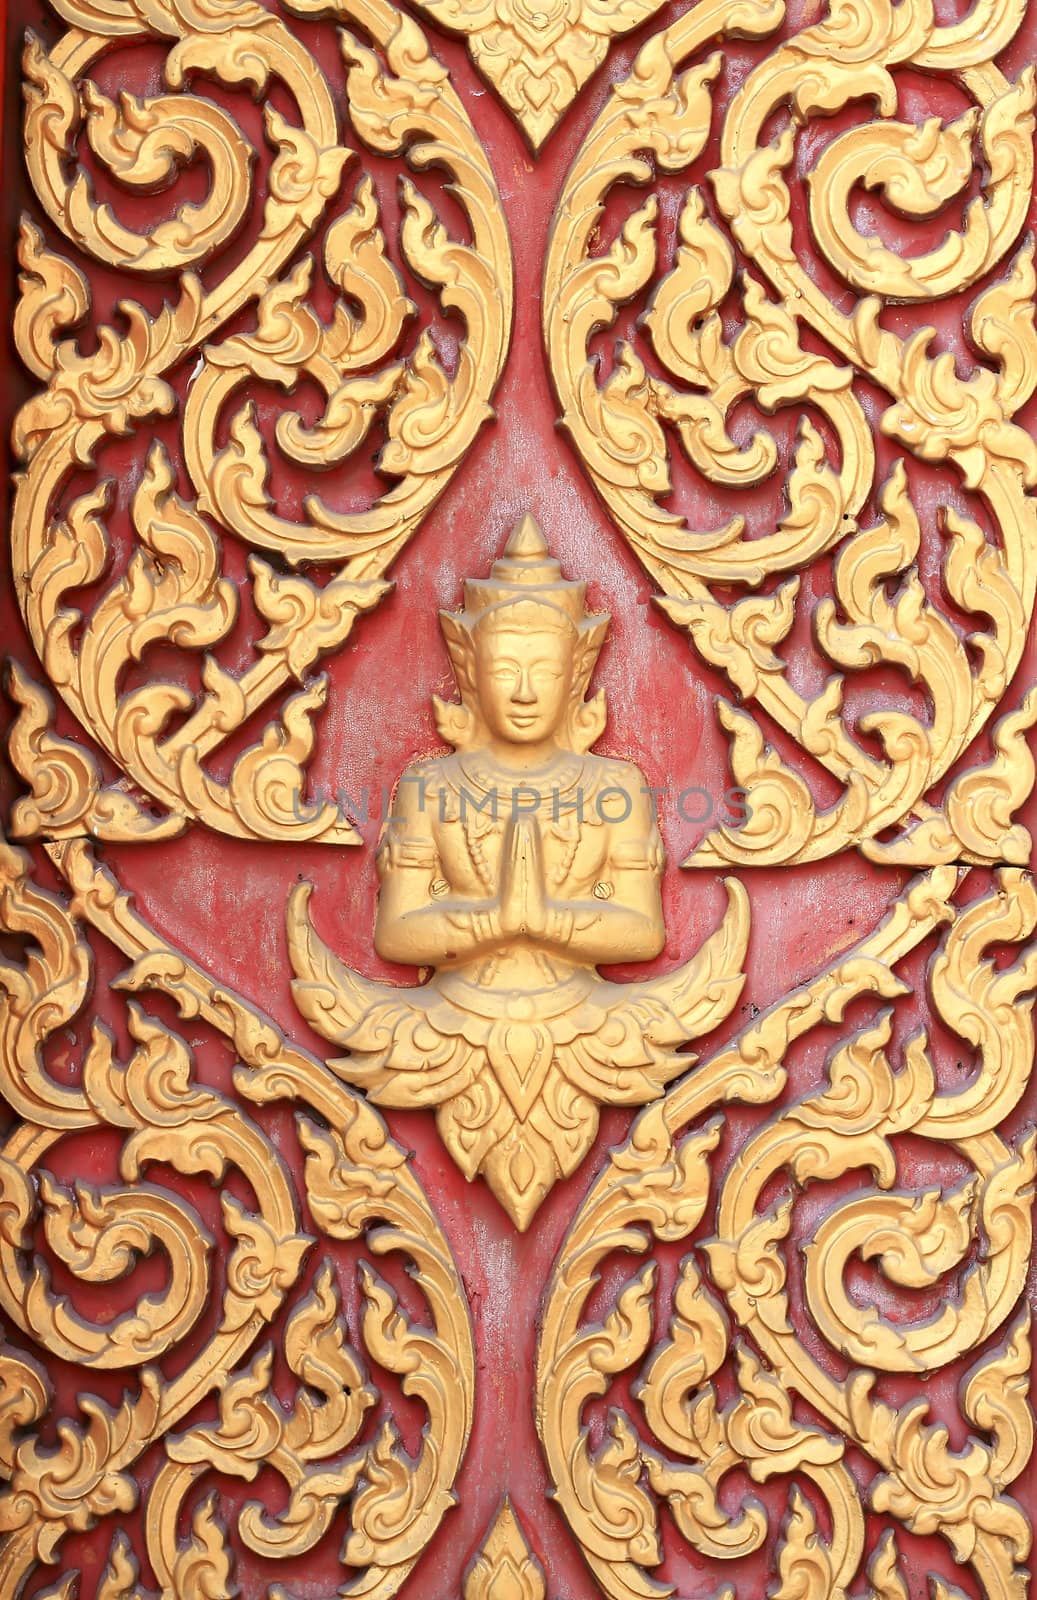 raditional thai style art carving at the door of temple